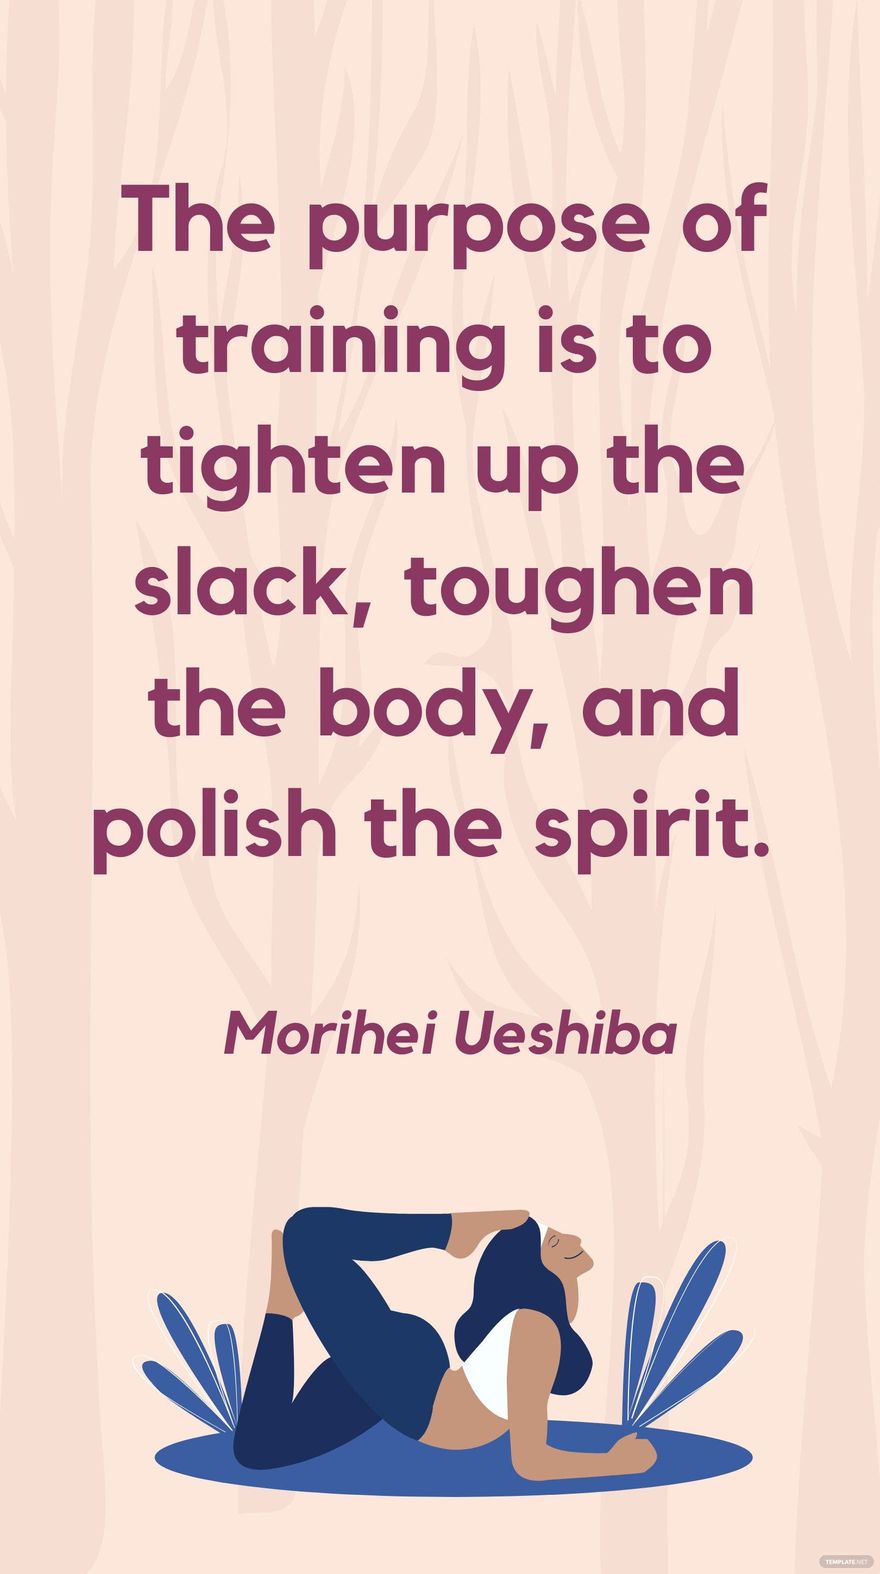 Morihei Ueshiba - The purpose of training is to tighten up the slack, toughen the body, and polish the spirit. in JPG